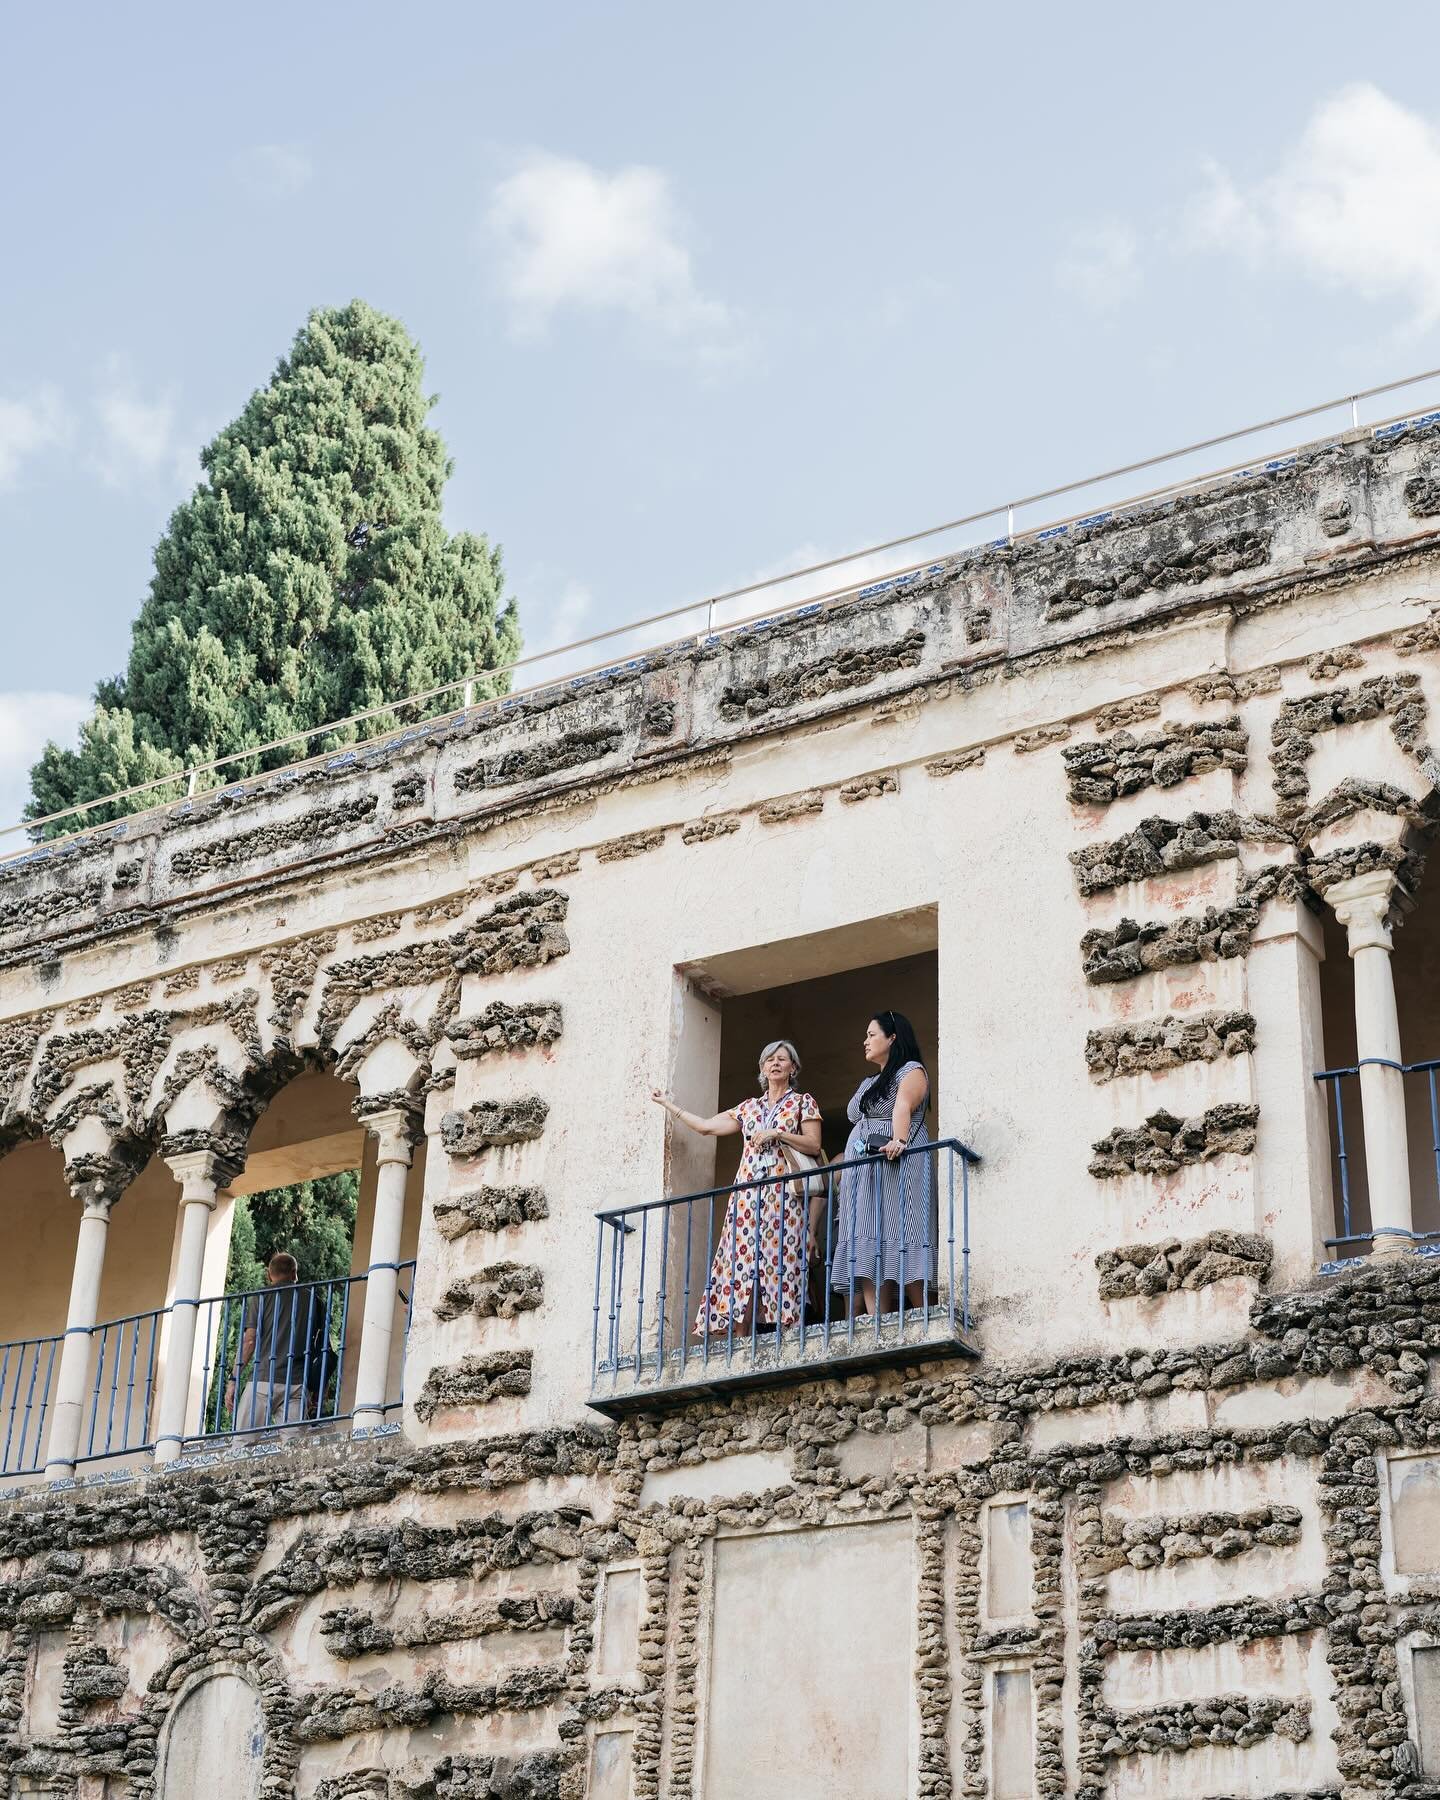 Day 1: Arriving at our amazing villa, which was once a palace to King Alfonso, we were greeted with cava and a guitarist playing Spanish music. 

We stayed across the street from the most beautiful Parque de Maria Luisa, where the Plaza de Espana is 